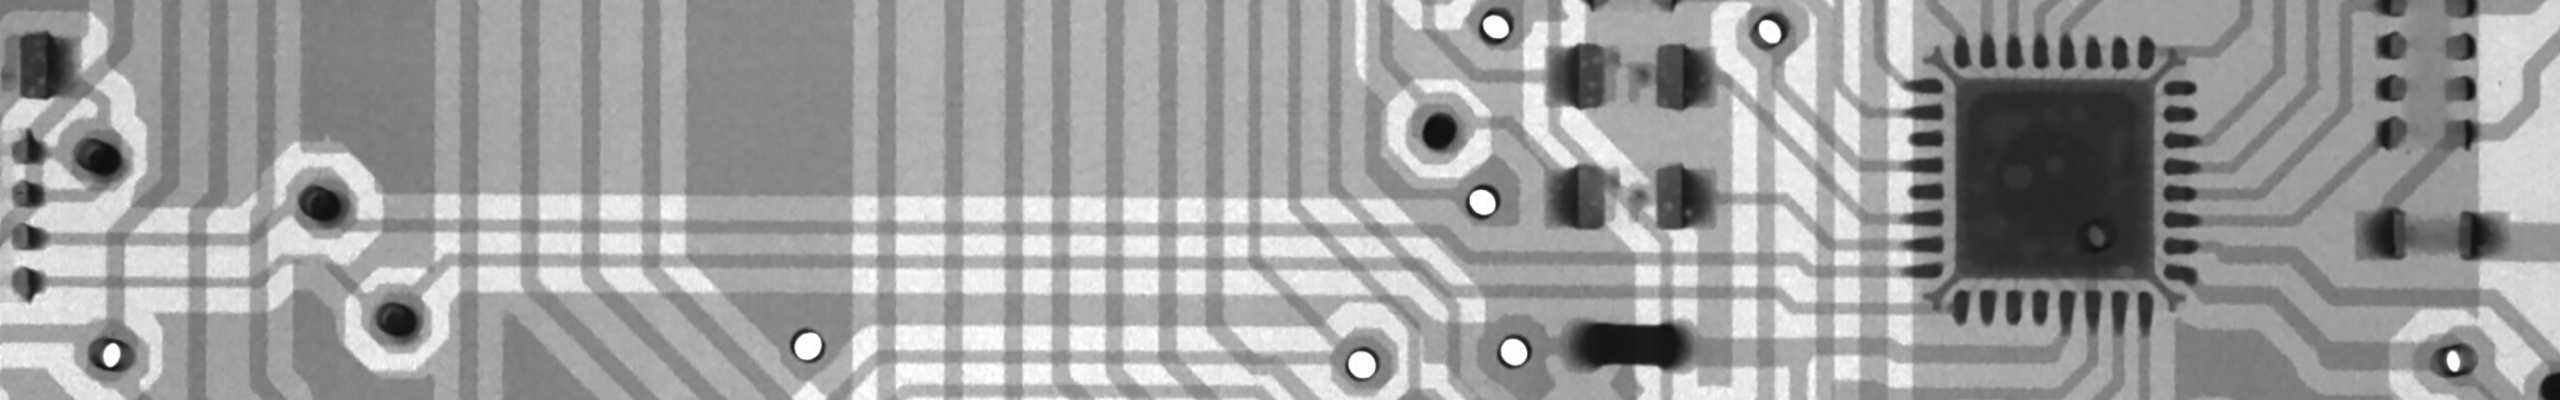 Black and white rendering of computer chip circuitry